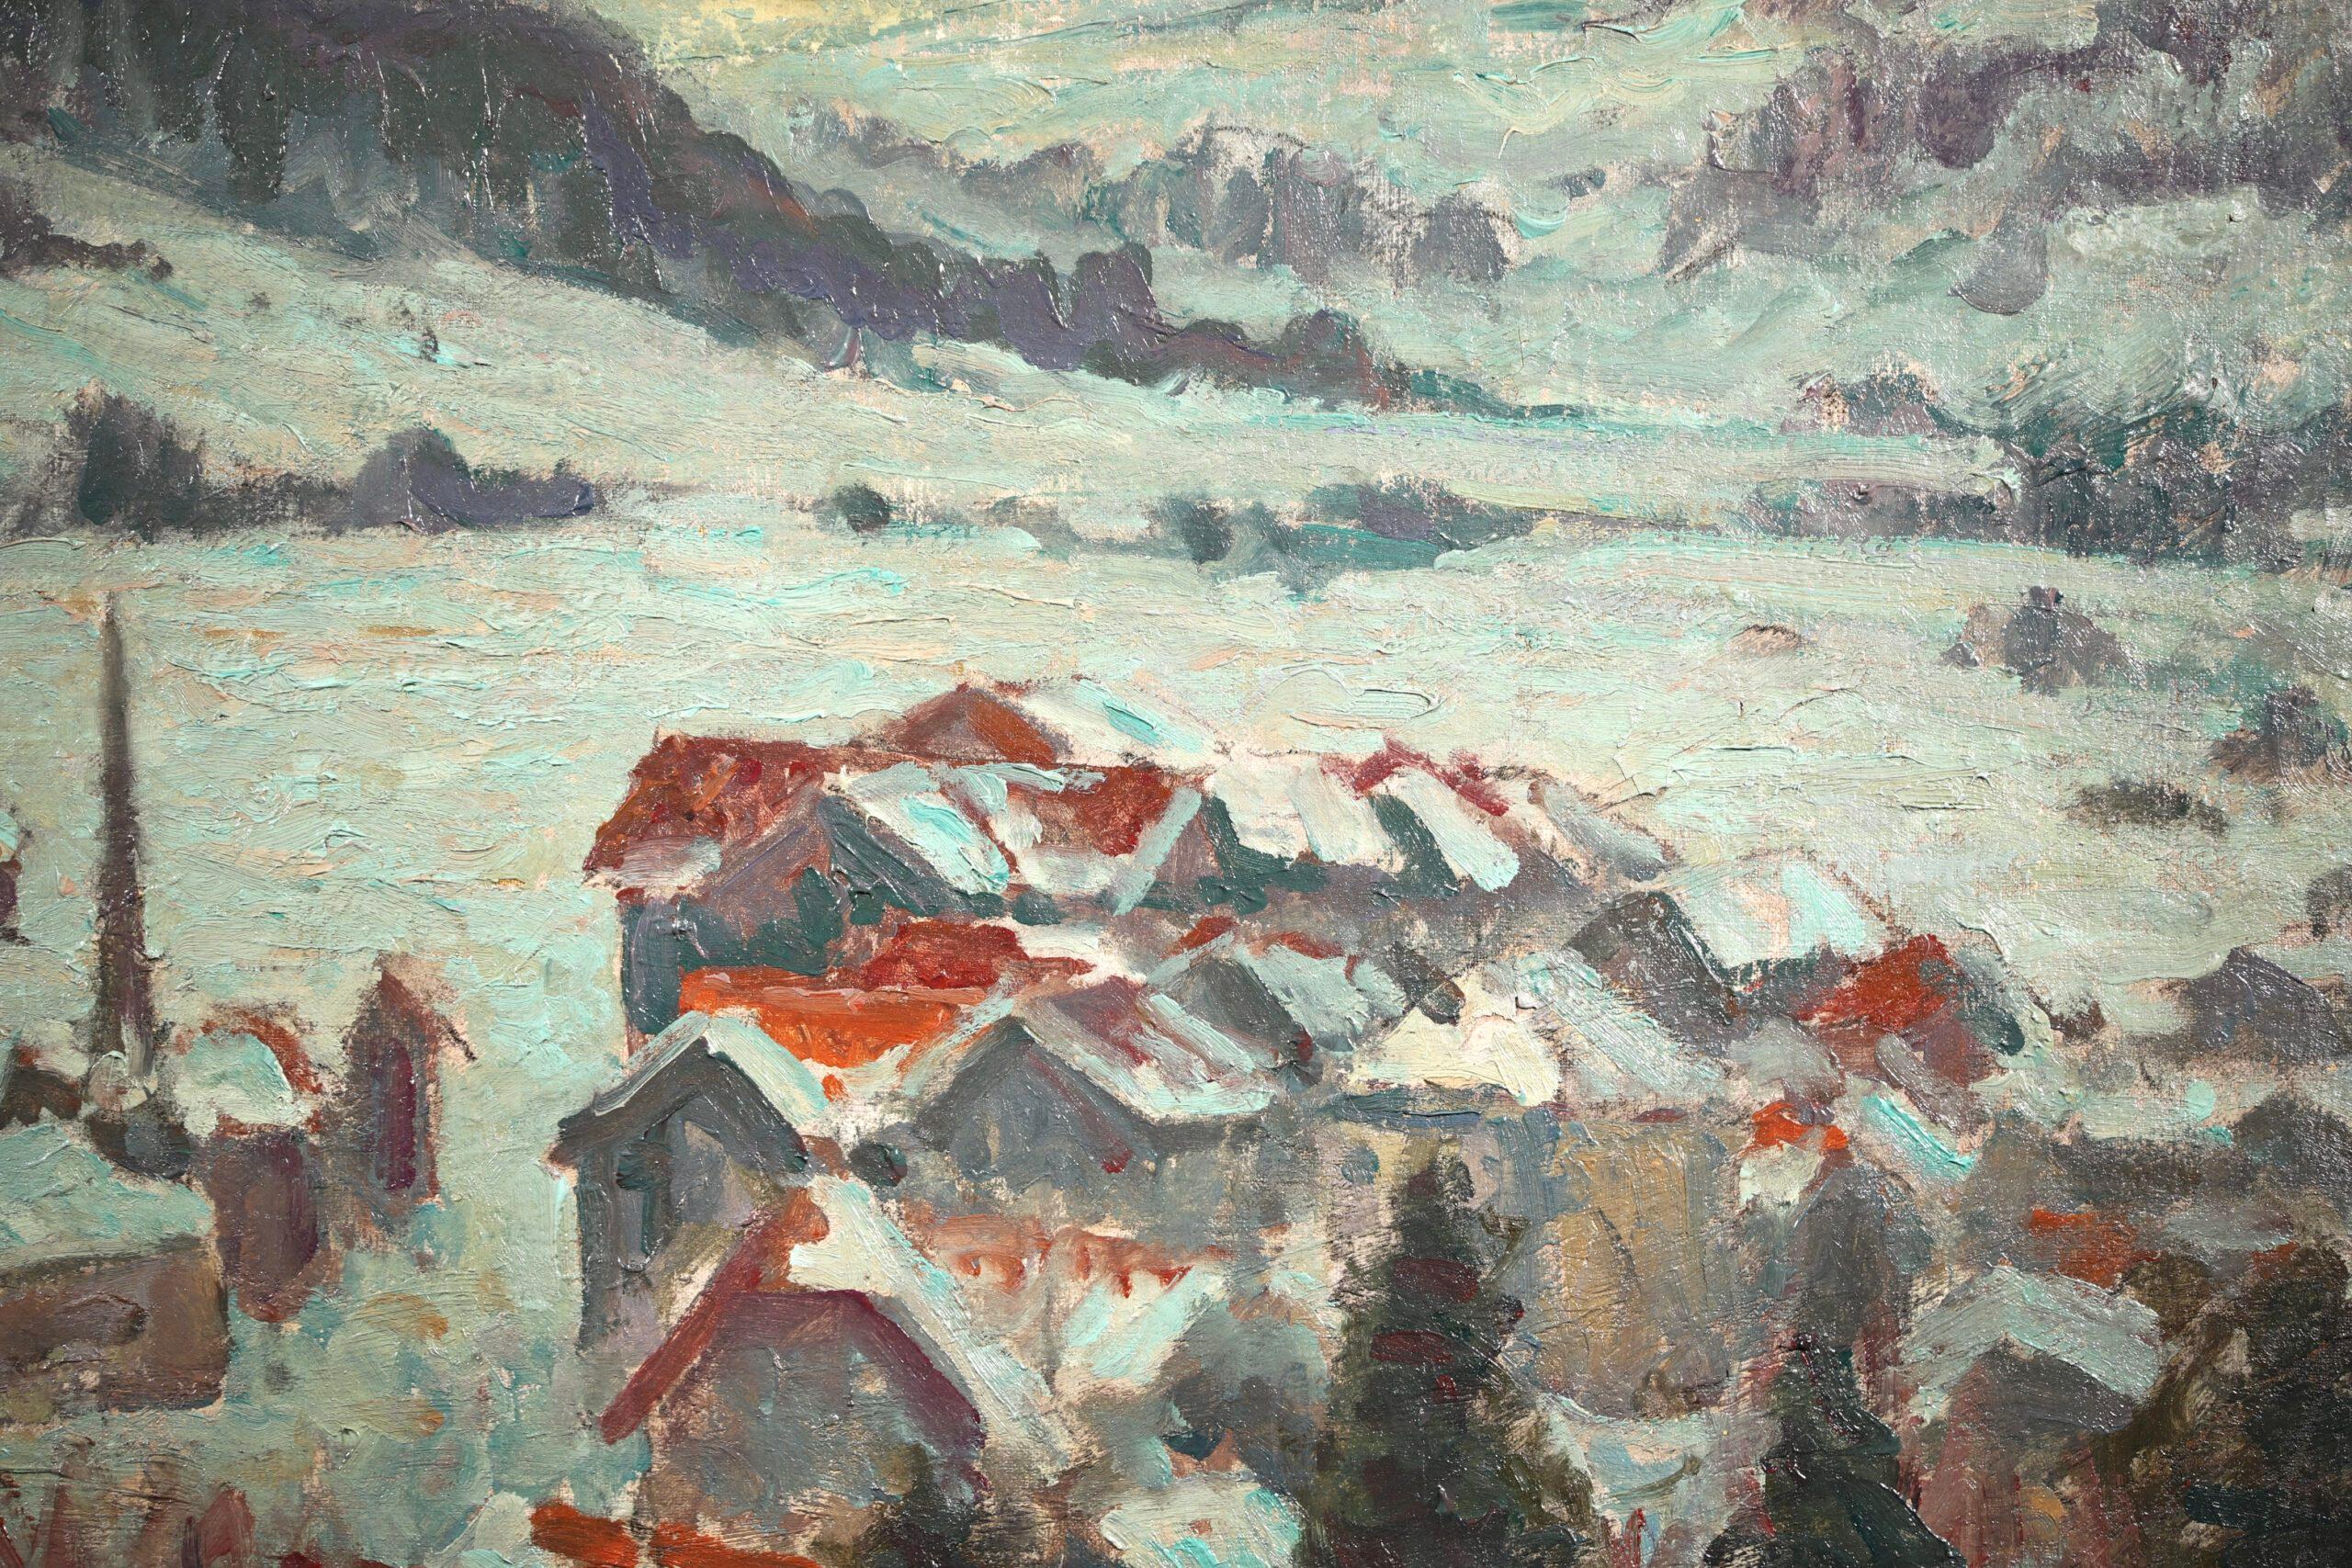 Winter Snow - Gstaad - Impressionist Landscape Oil by William Samuel Horton For Sale 4